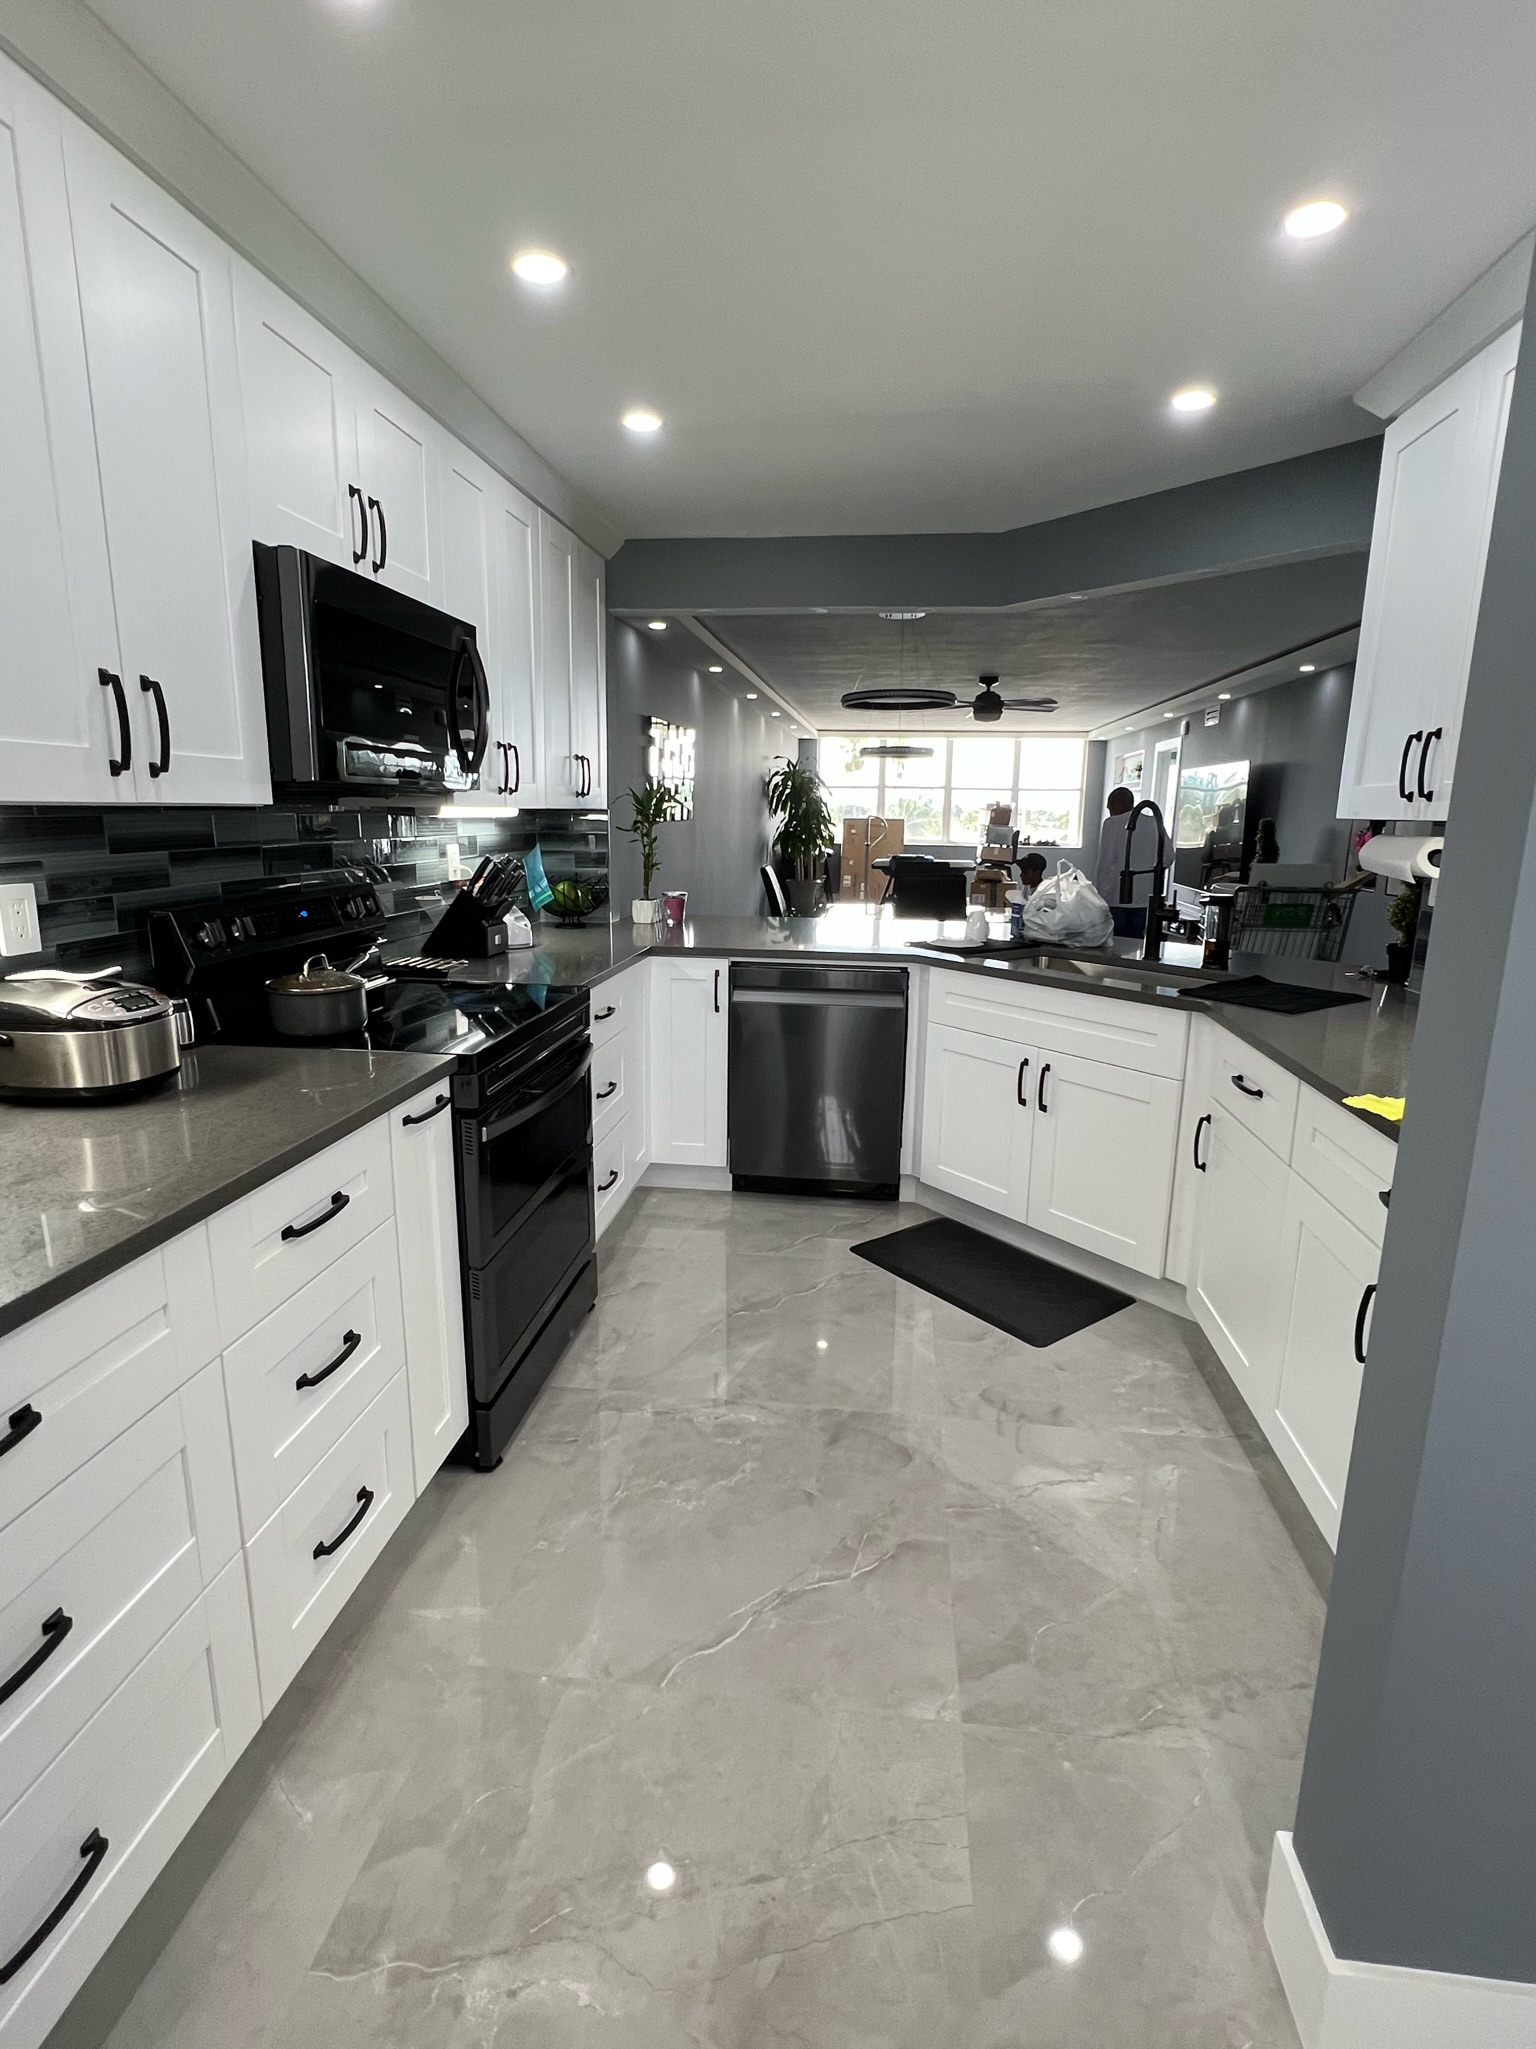 Kitchen Renovation Contractors in South Florida